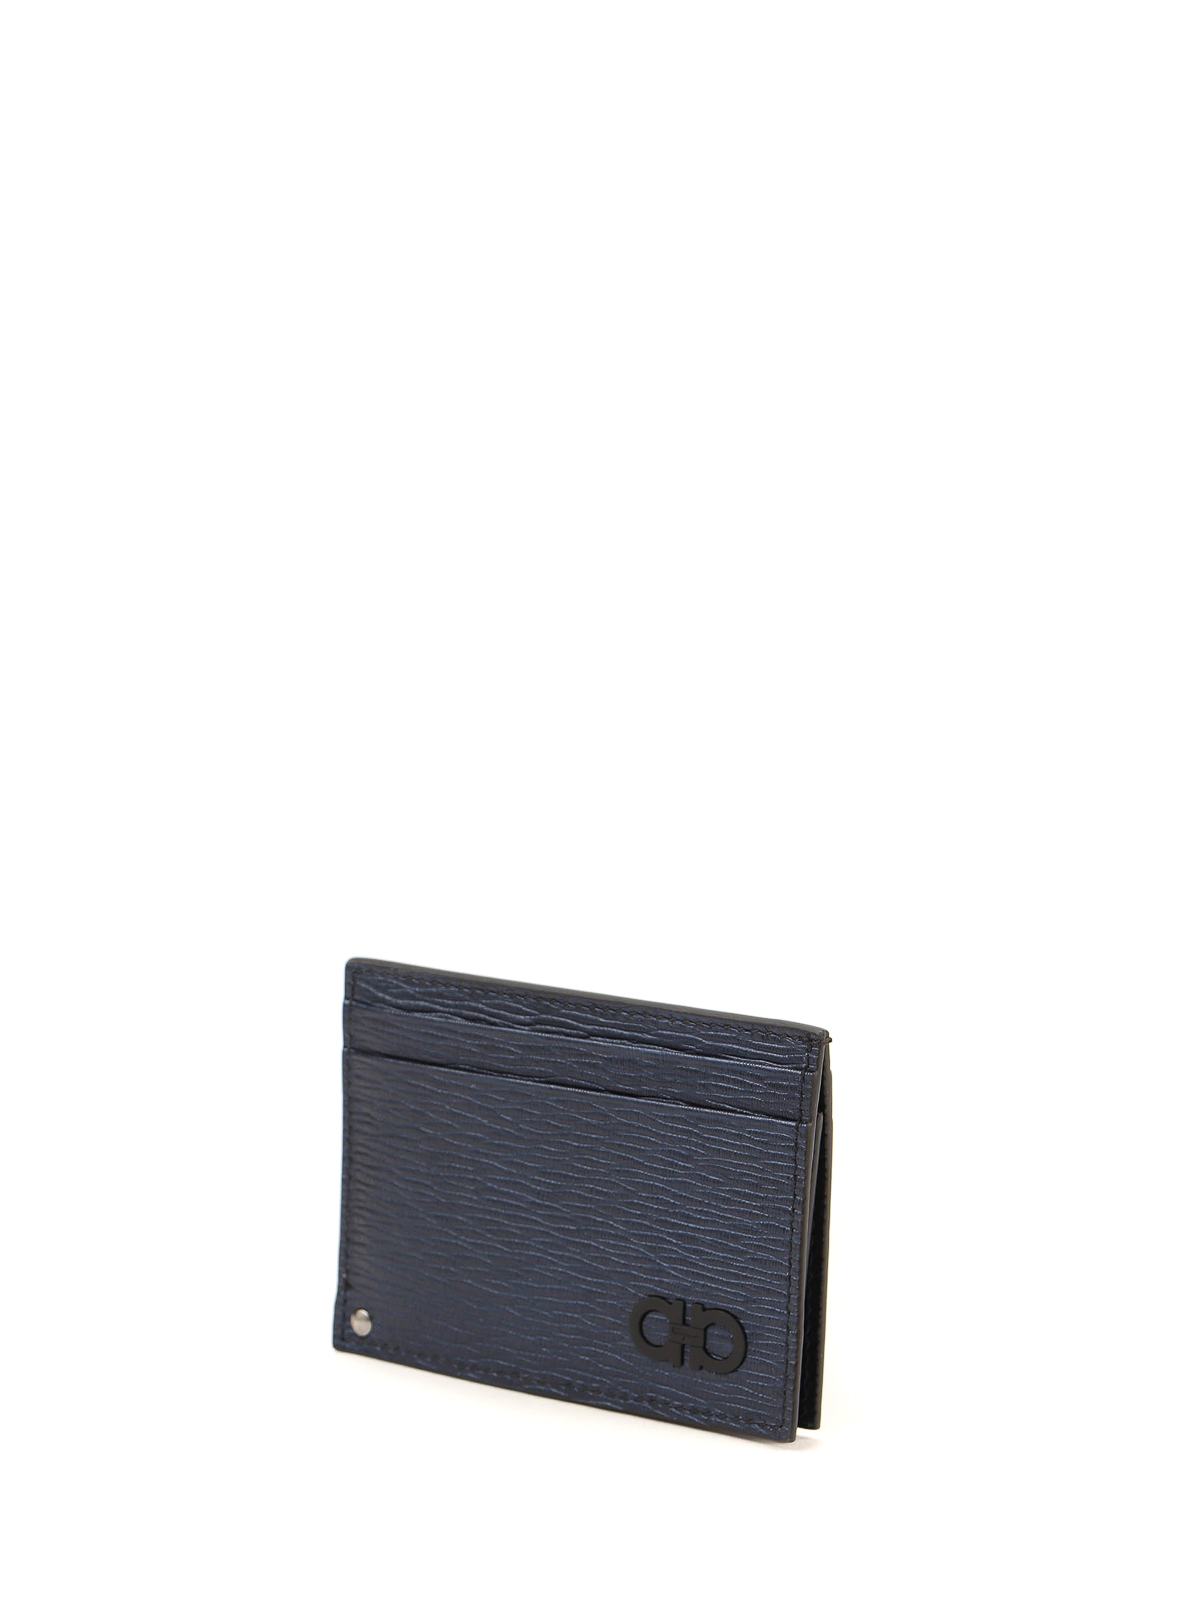 Womens Accessories Wallets and cardholders Ferragamo Leather Black Wallet In Hammered Calfskin 